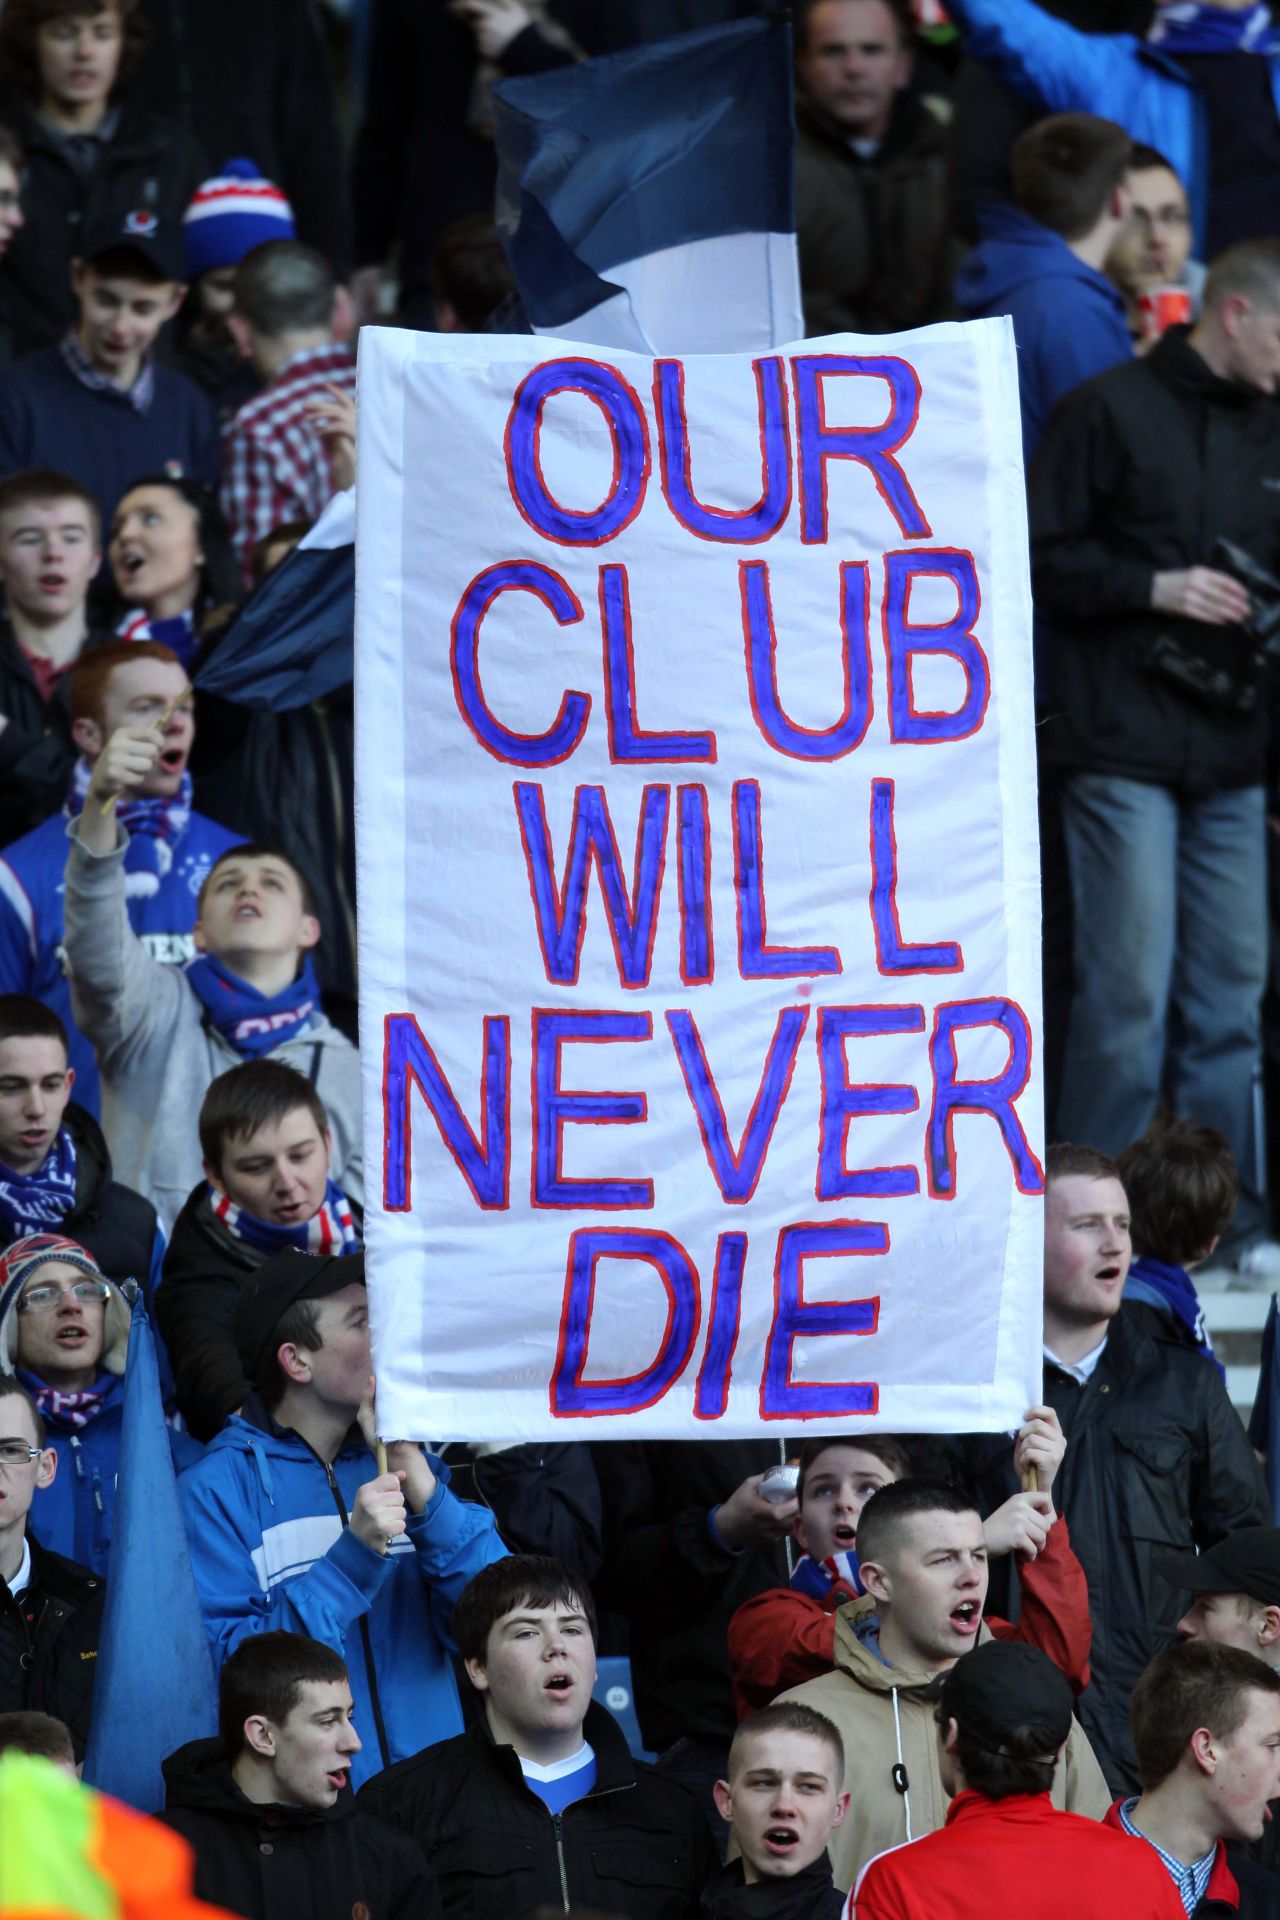 Rangers fans have reacted with bewilderment to the developments at Ibrox, venting their anger at the club's owner Craig Whyte and his predecessor David Murray. But they are adamant their club will survive.